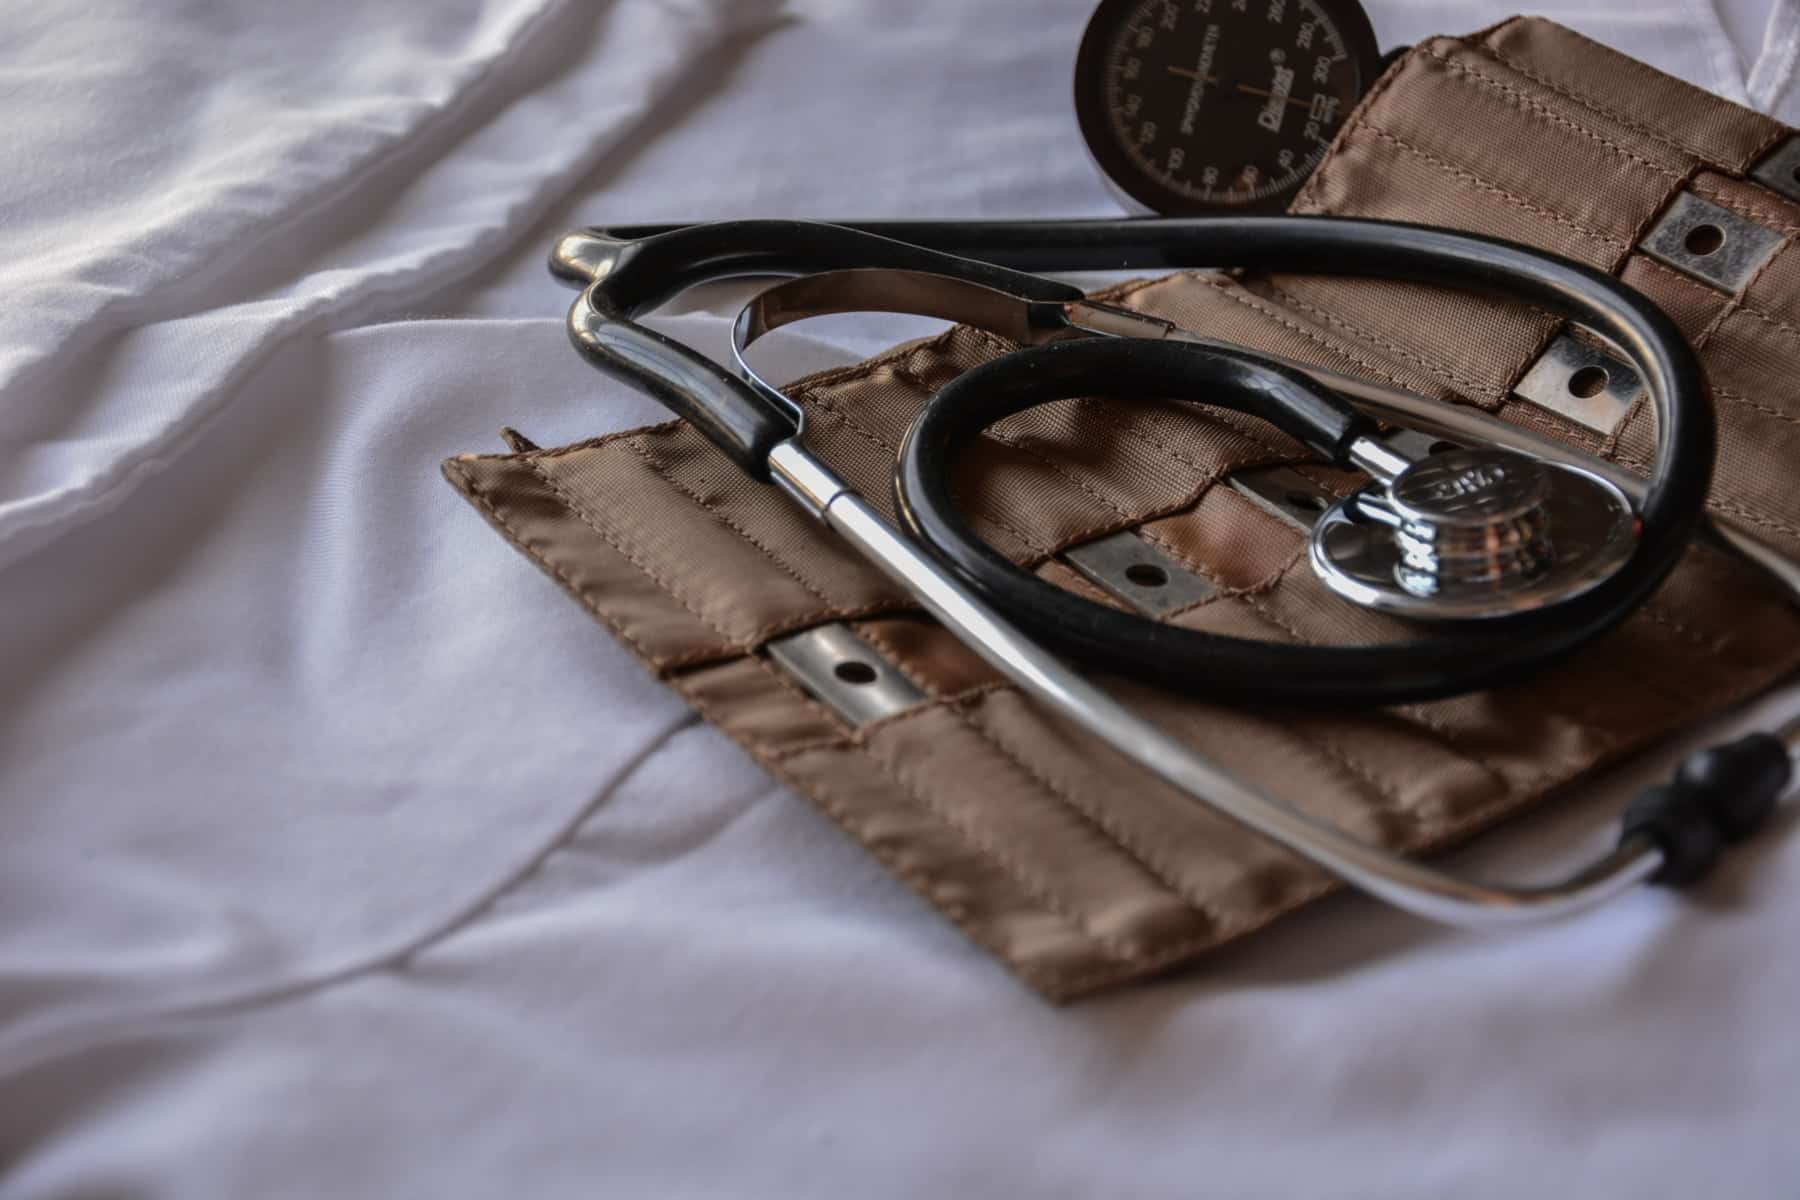 Black stethoscope with brow leather case